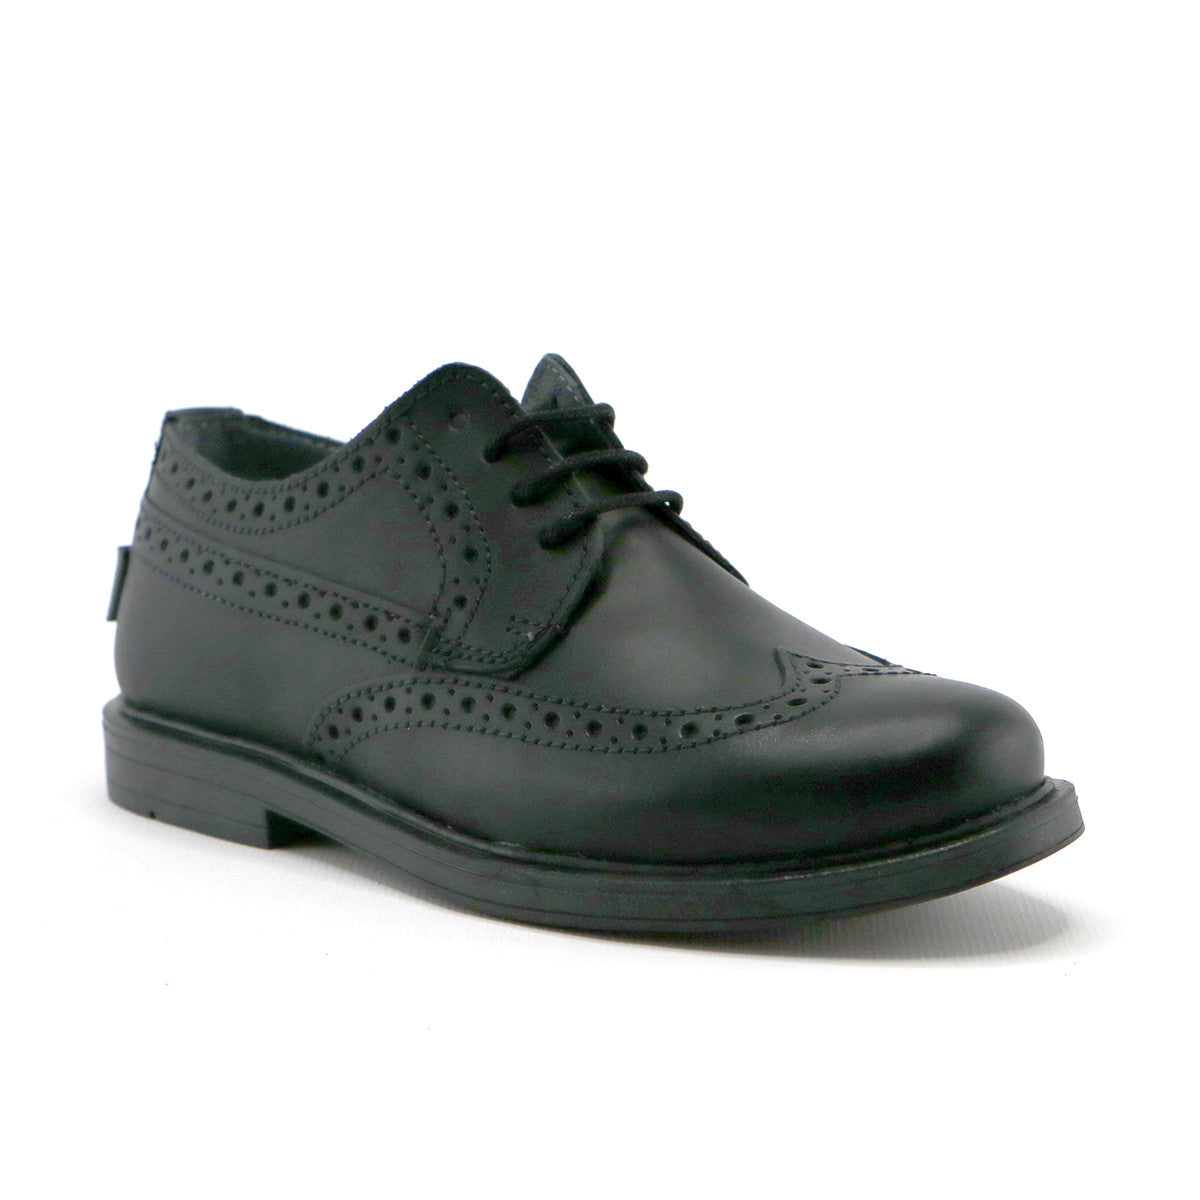 Black leather boys lace-up classic 